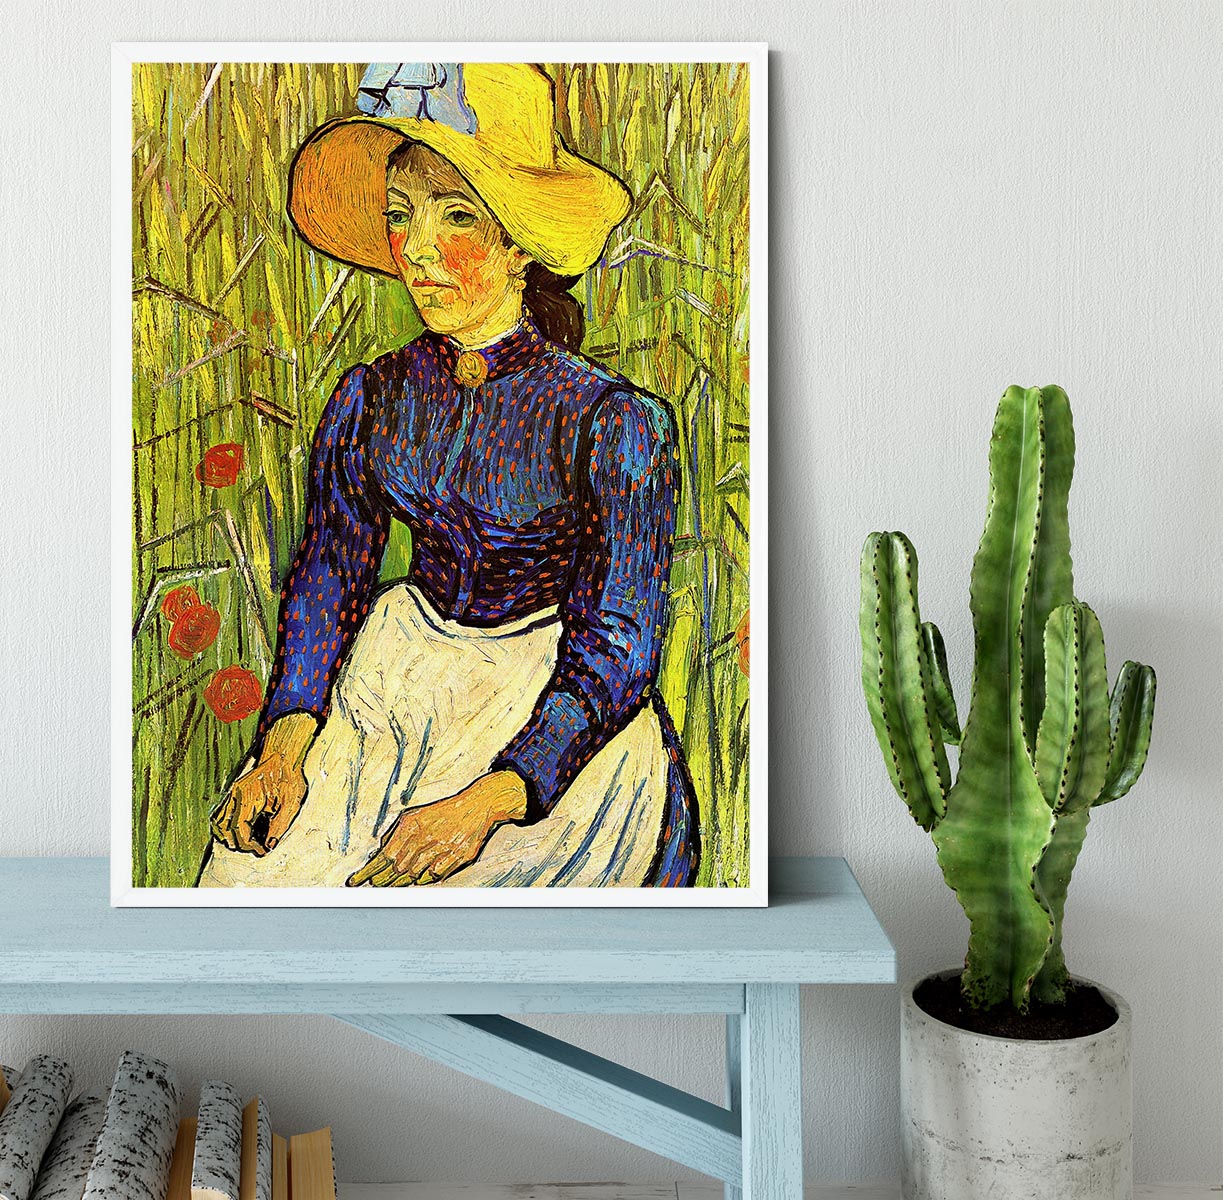 Young Peasant Woman with Straw Hat Sitting in the Wheat by Van Gogh Framed Print - Canvas Art Rocks -6